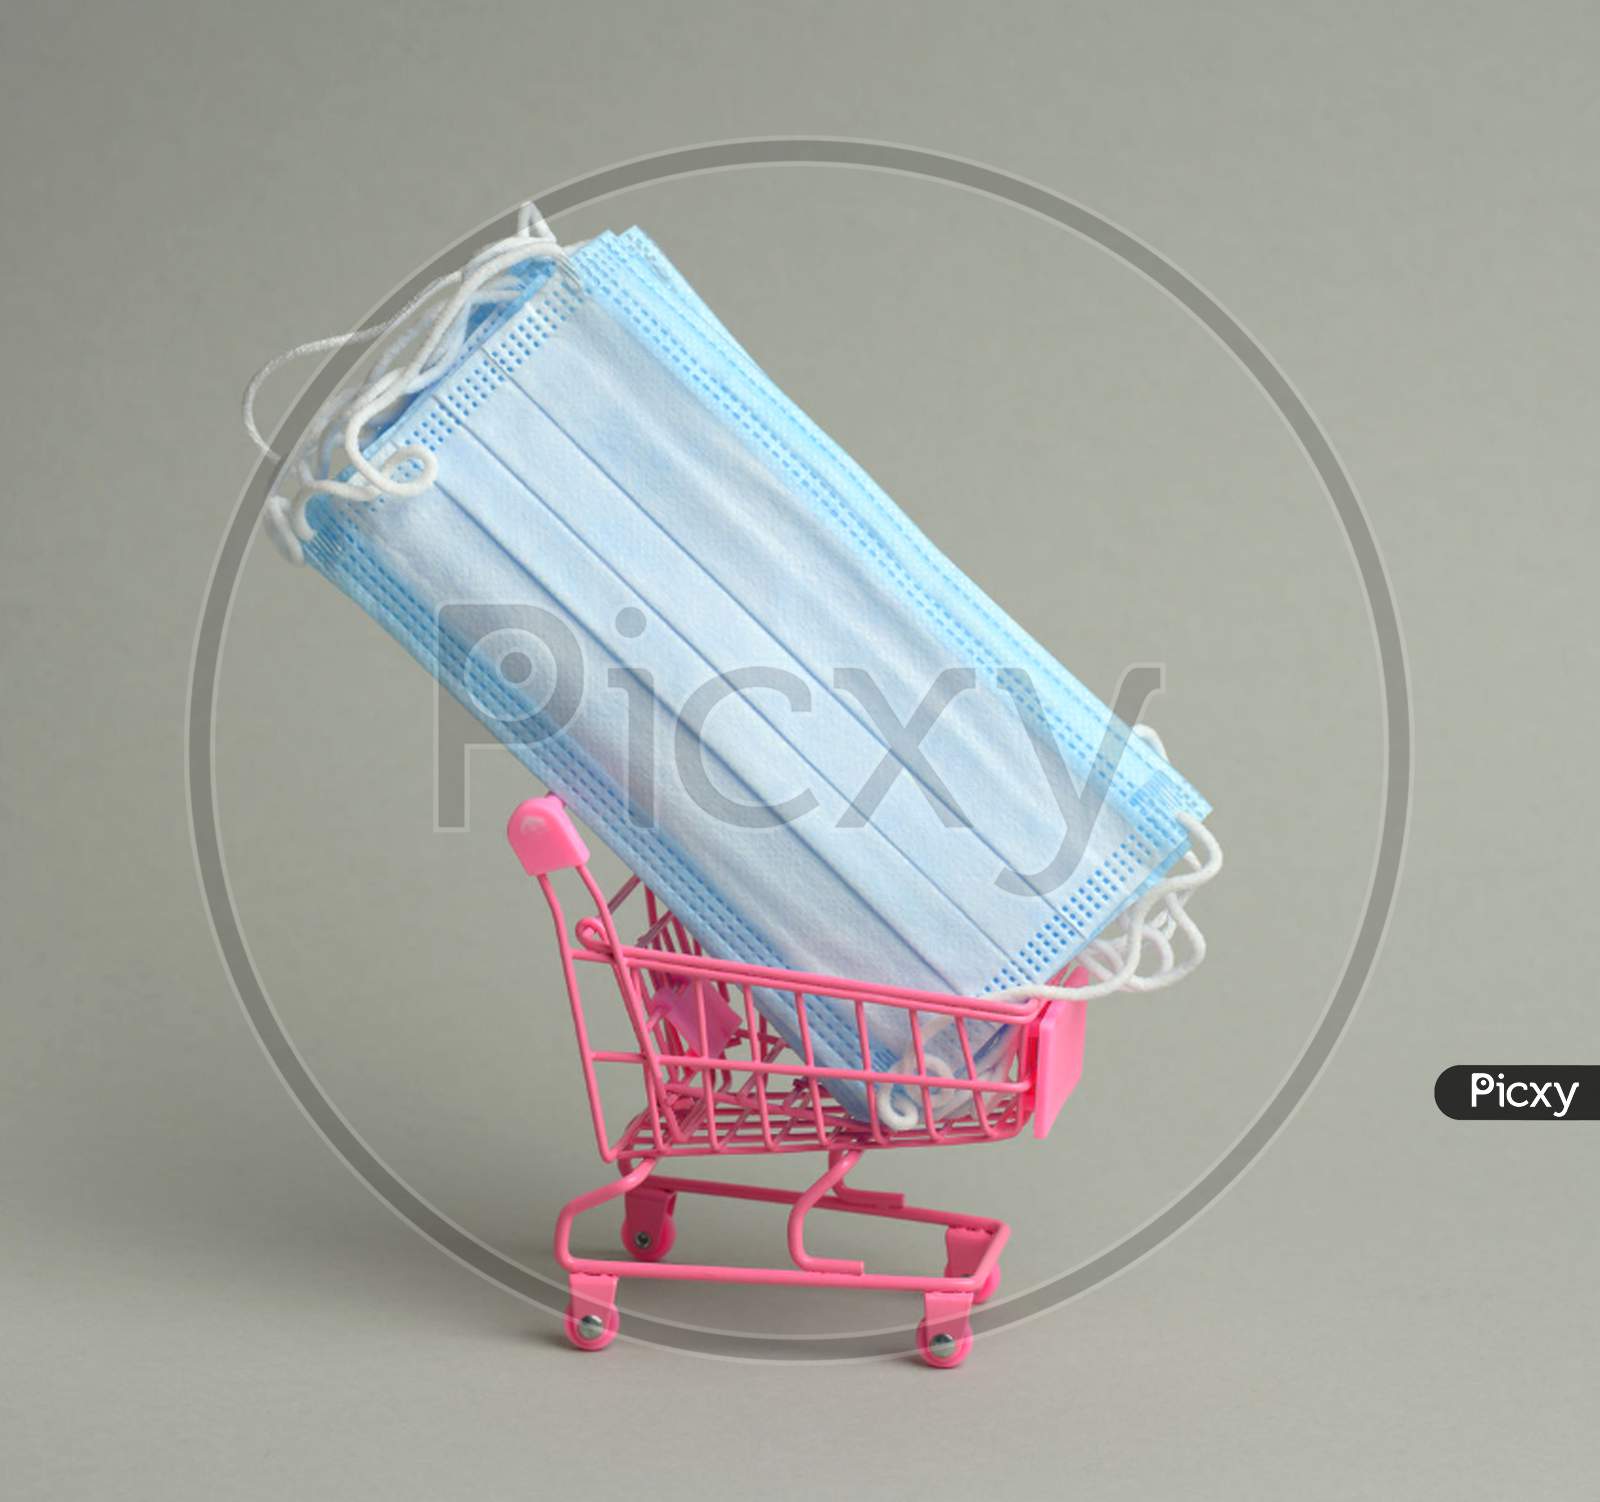 Stack Of Blue Disposable Medical Masks In A Pink Miniature Trolley On A Gray Background. Sale Of Medical Devices Online